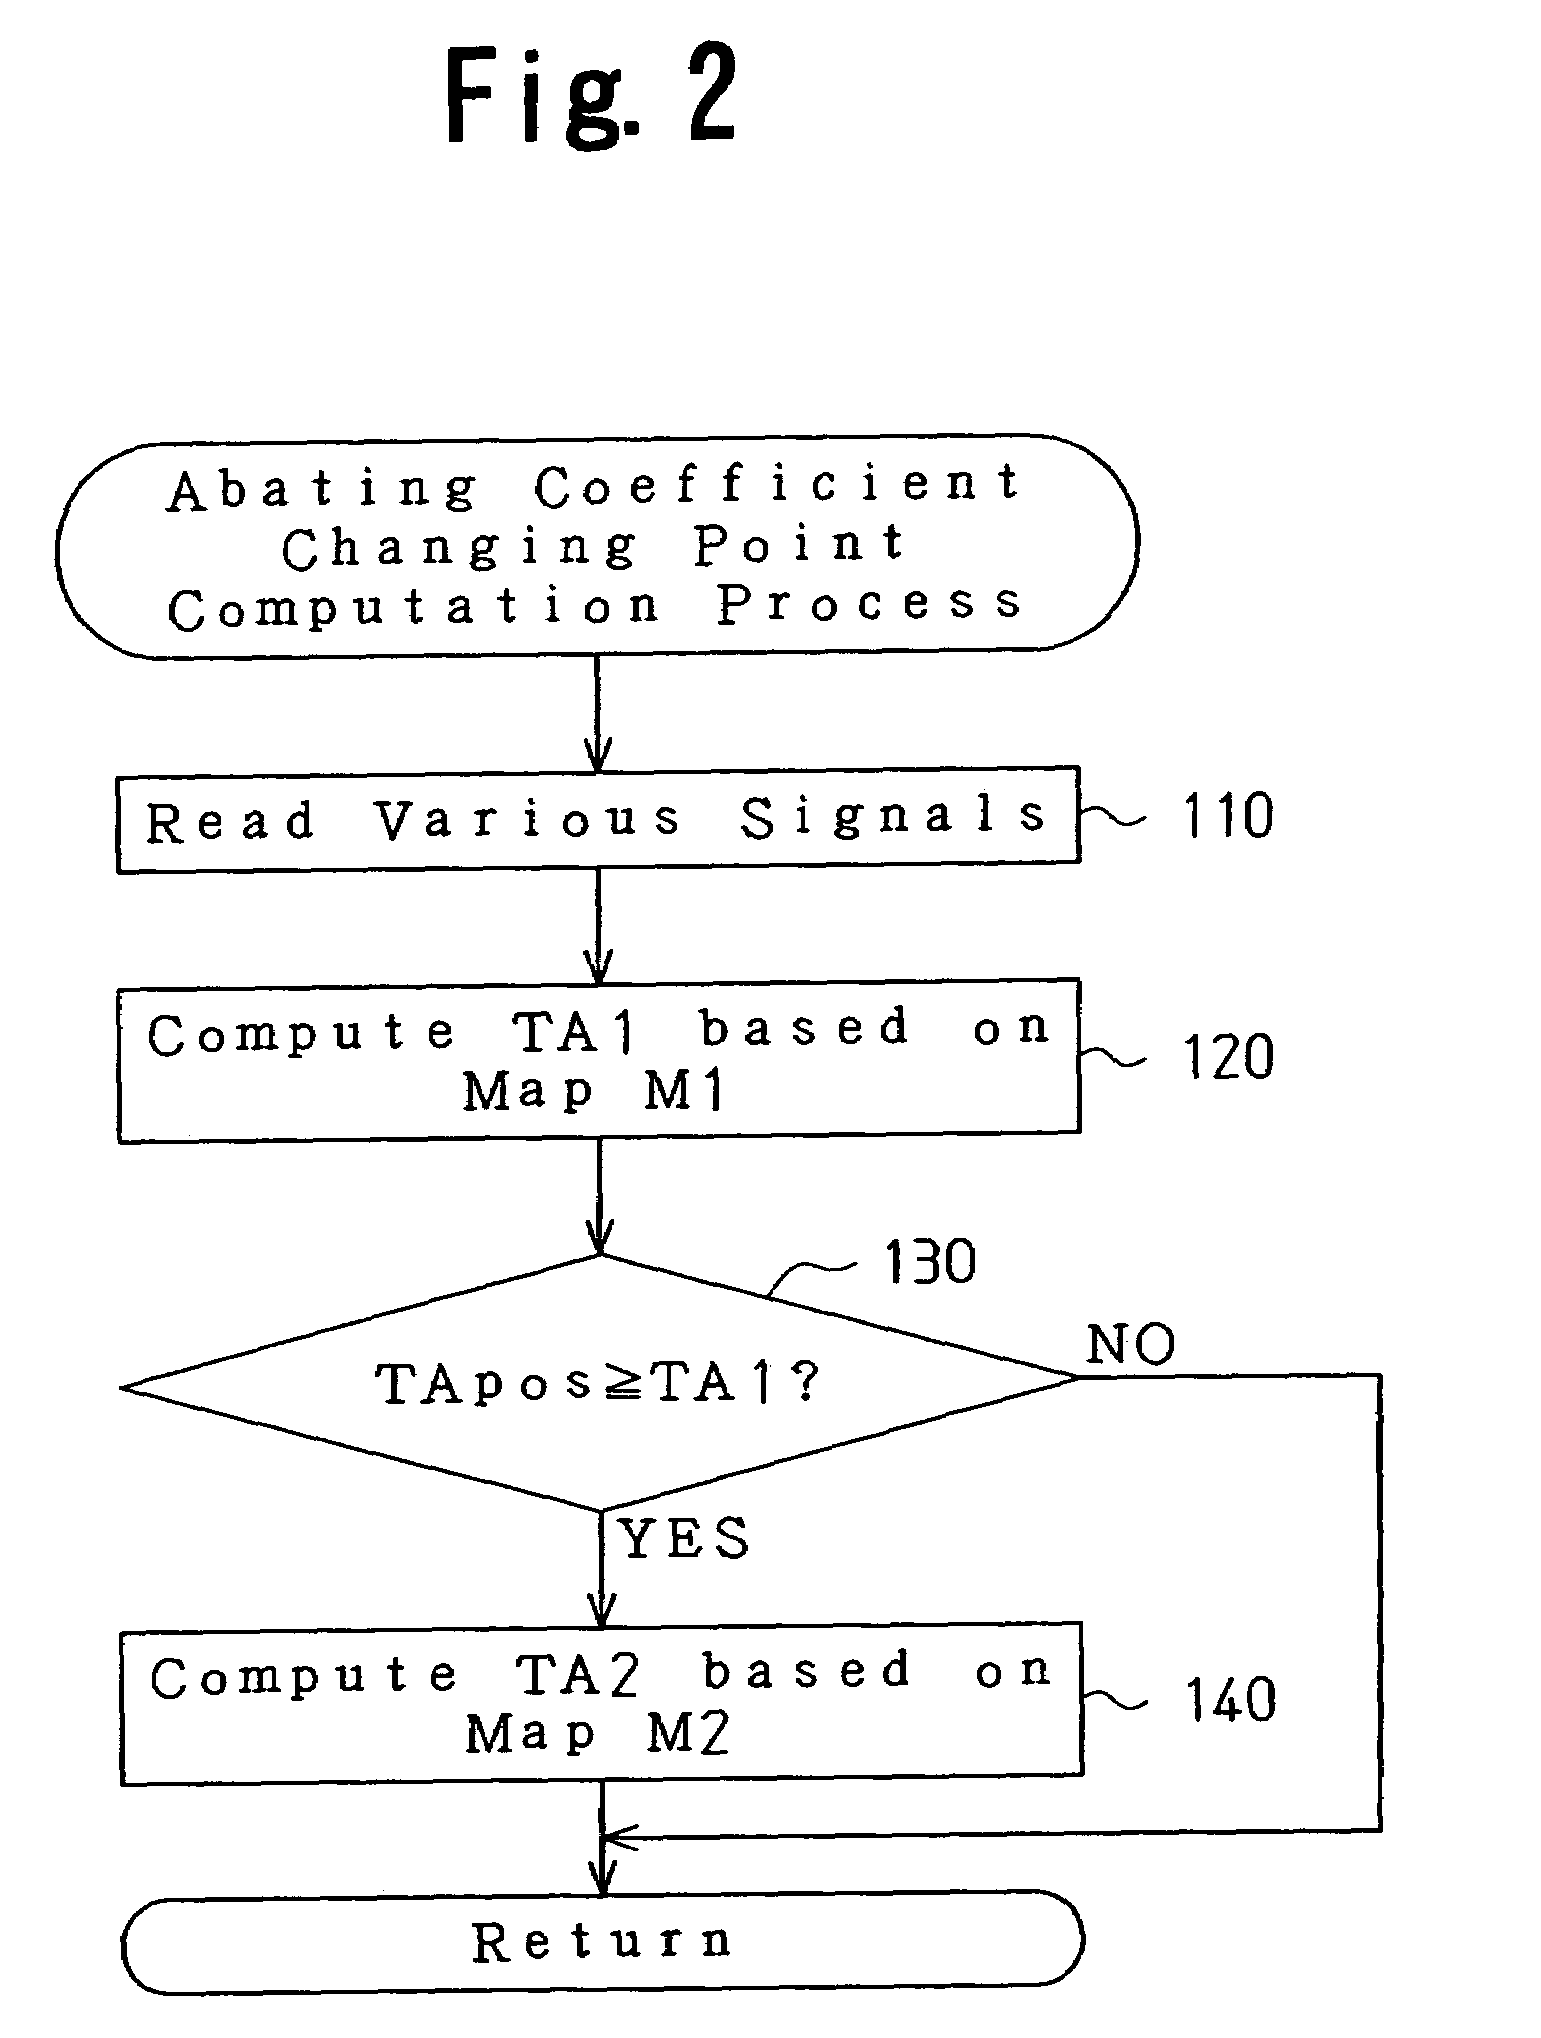 Throttle opening degree control apparatus for internal combustion engine